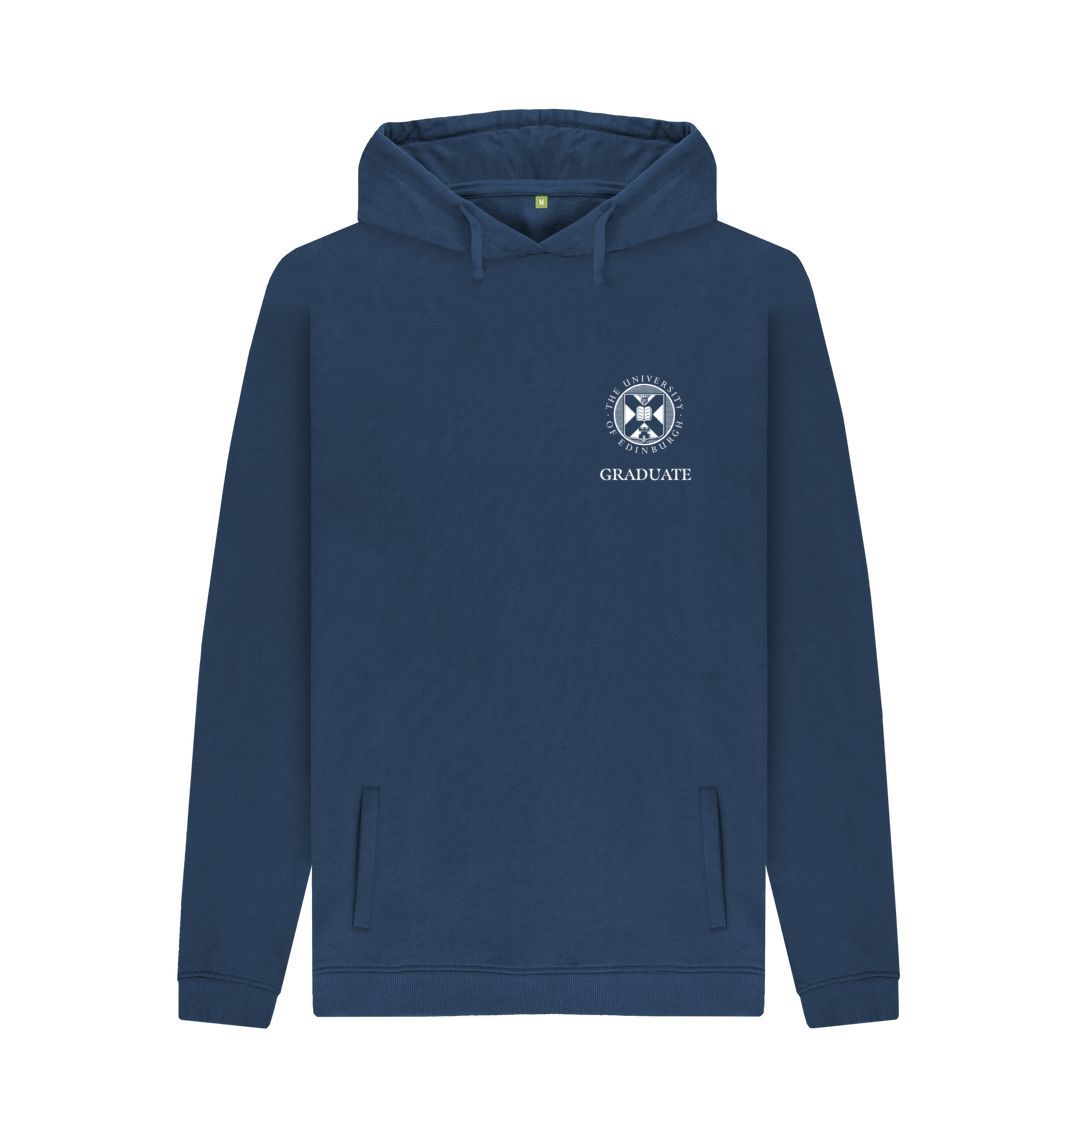 Navy School of Social and Political Science 'Class Of' Graduate Hoodie